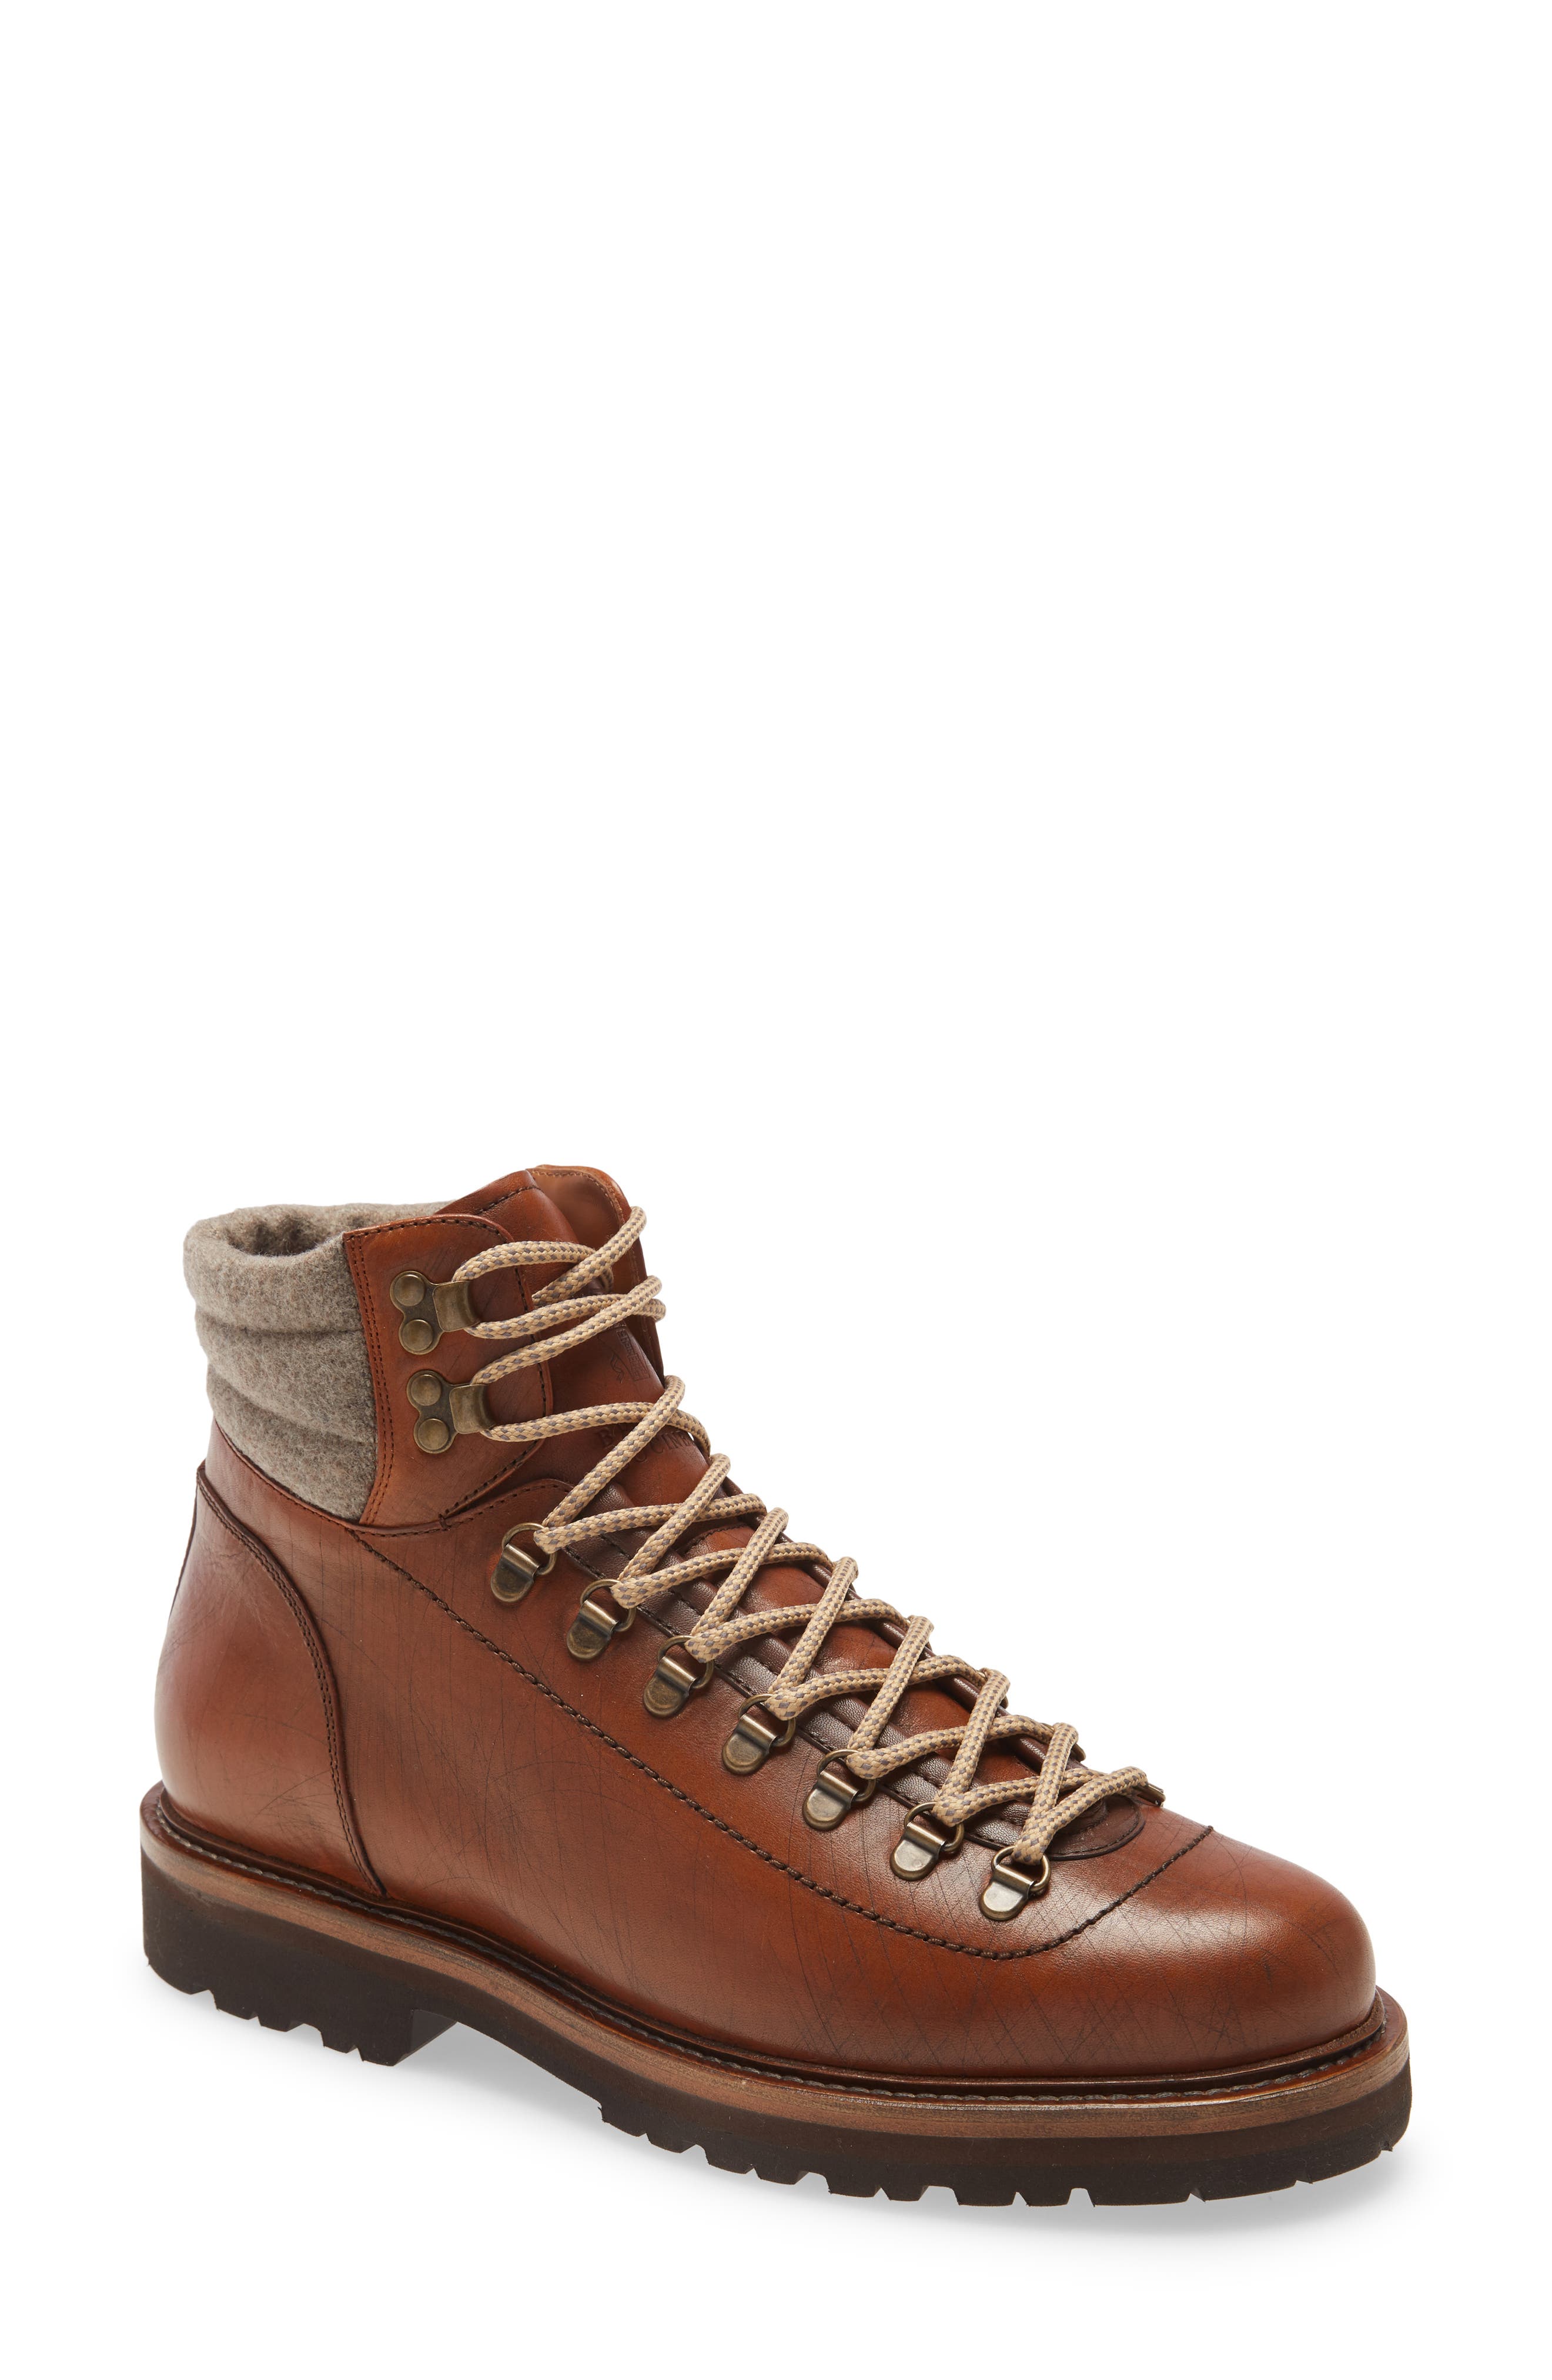 nordstrom mens hiking boots